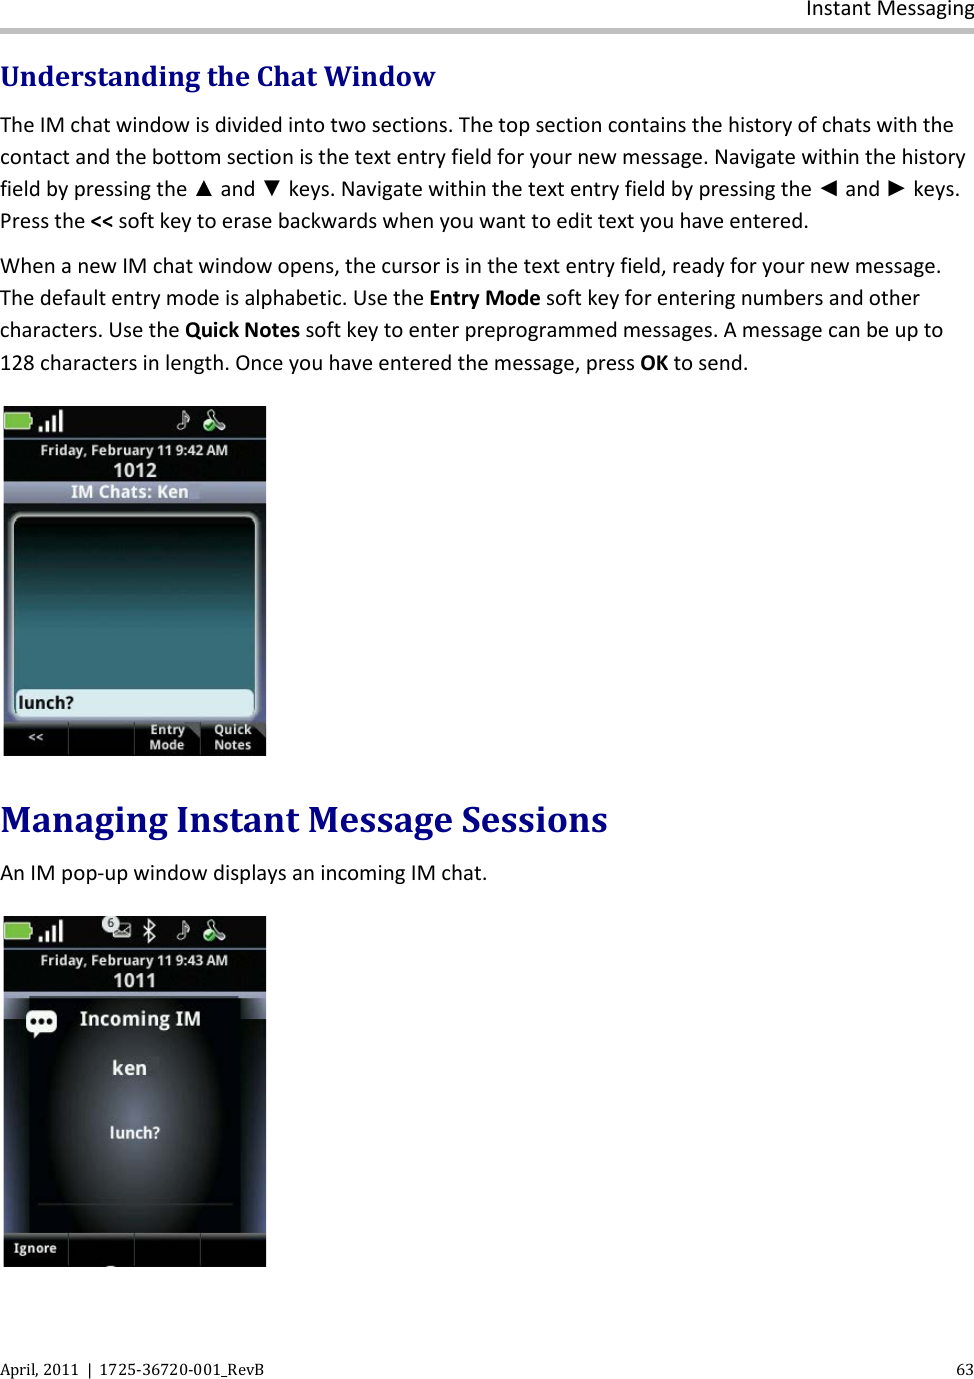  Instant Messaging April, 2011  |  1725-36720-001_RevB    63  Understanding the Chat Window The IM chat window is divided into two sections. The top section contains the history of chats with the contact and the bottom section is the text entry field for your new message. Navigate within the history field by pressing the ▲ and ▼ keys. Navigate within the text entry field by pressing the ◄ and ► keys. Press the &lt;&lt; soft key to erase backwards when you want to edit text you have entered. When a new IM chat window opens, the cursor is in the text entry field, ready for your new message. The default entry mode is alphabetic. Use the Entry Mode soft key for entering numbers and other characters. Use the Quick Notes soft key to enter preprogrammed messages. A message can be up to 128 characters in length. Once you have entered the message, press OK to send.   Managing Instant Message Sessions An IM pop-up window displays an incoming IM chat.  